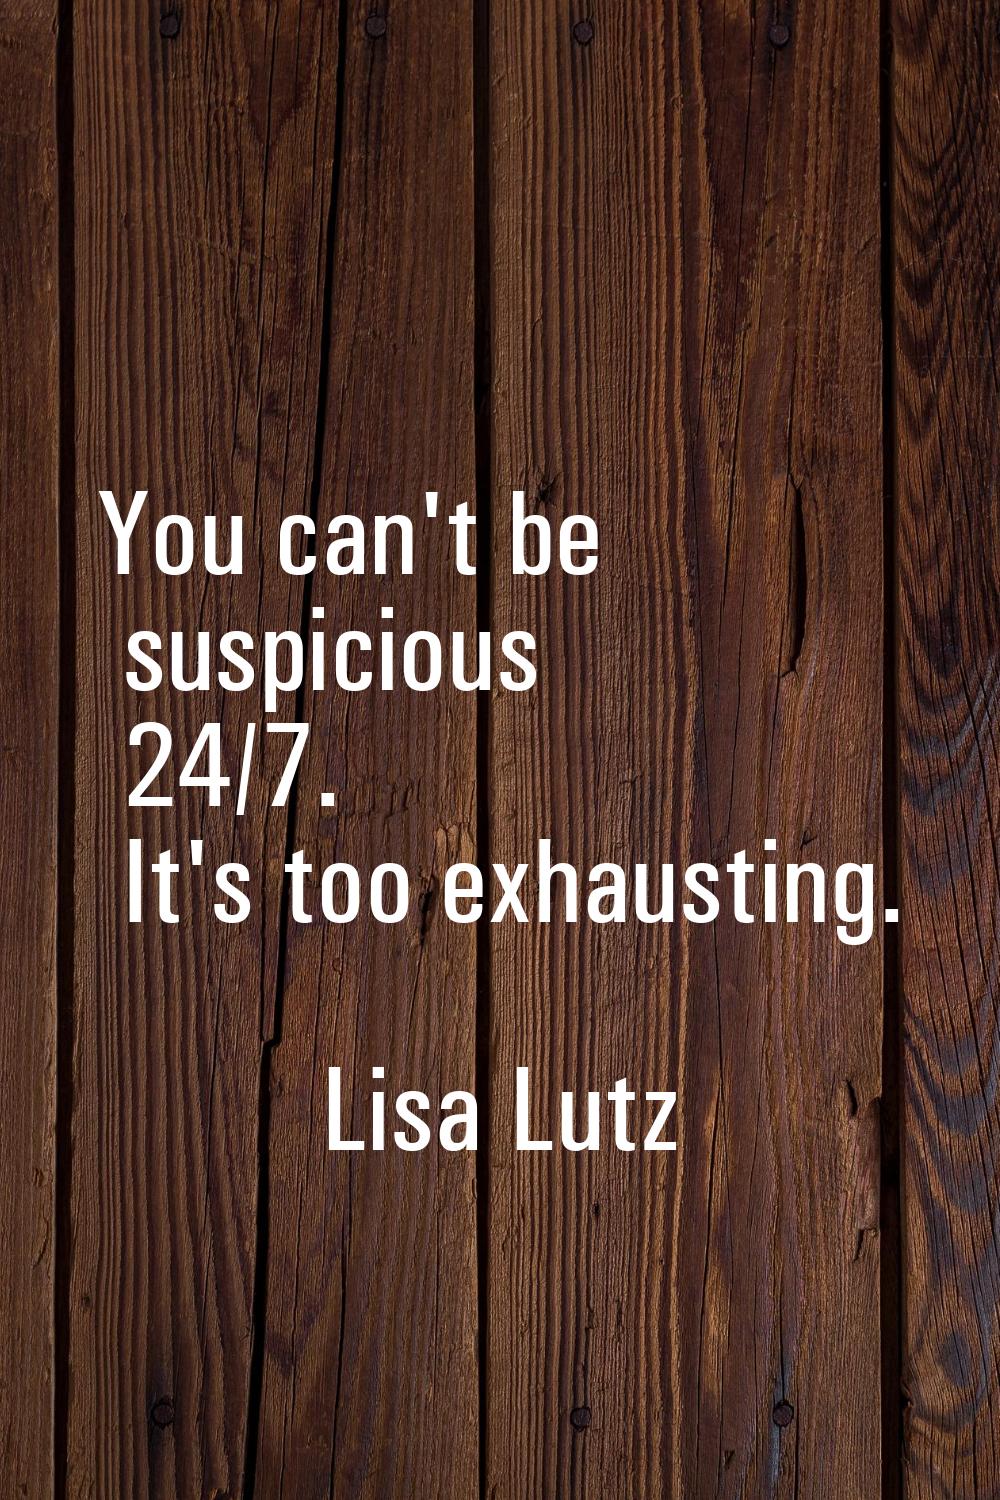 You can't be suspicious 24/7. It's too exhausting.